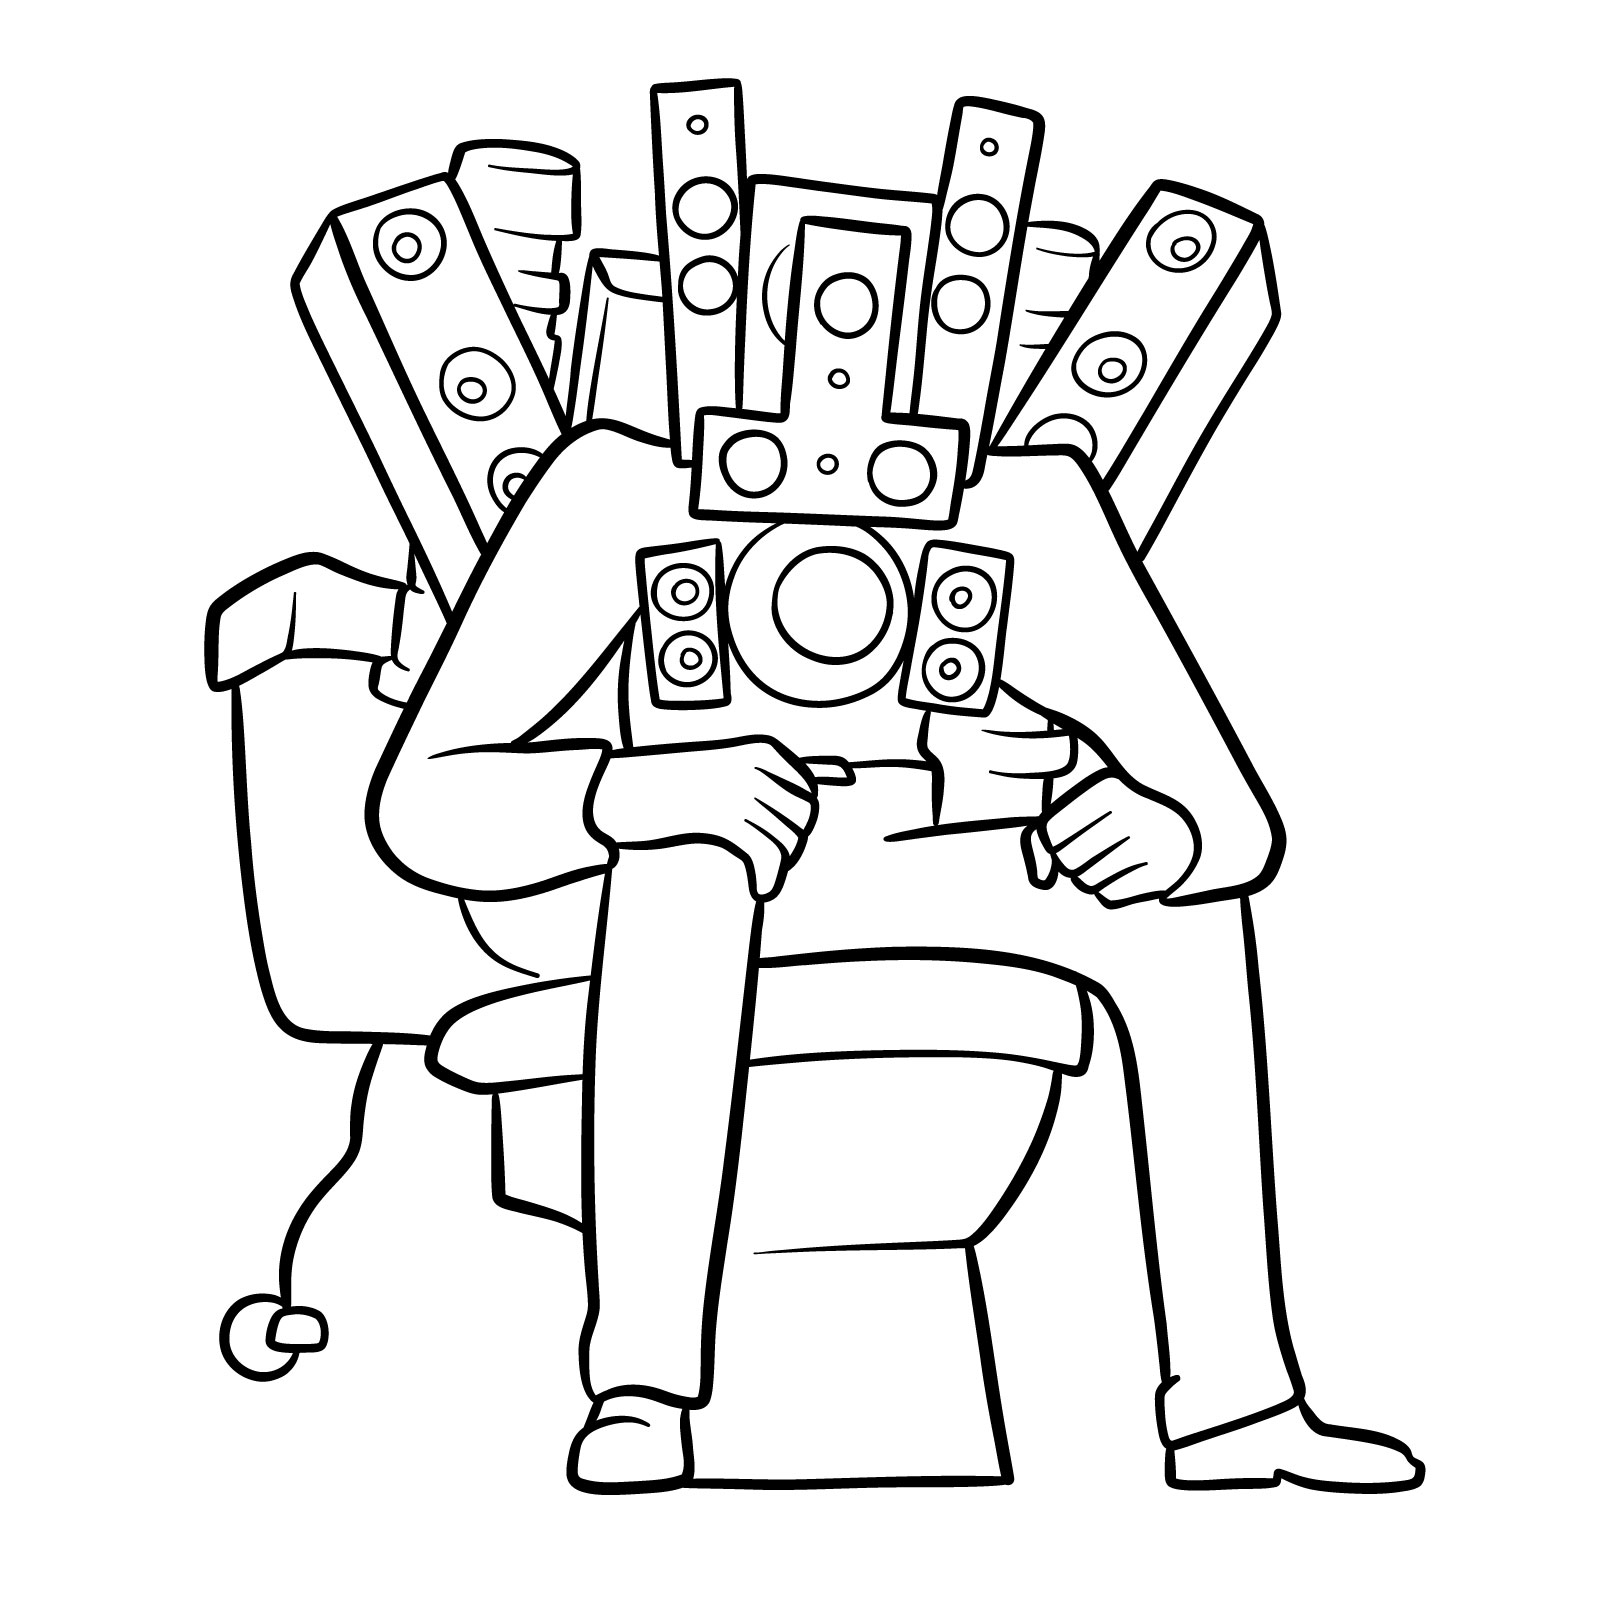 Completed drawing of Titan Speakerman seated on a toilet throne - final step